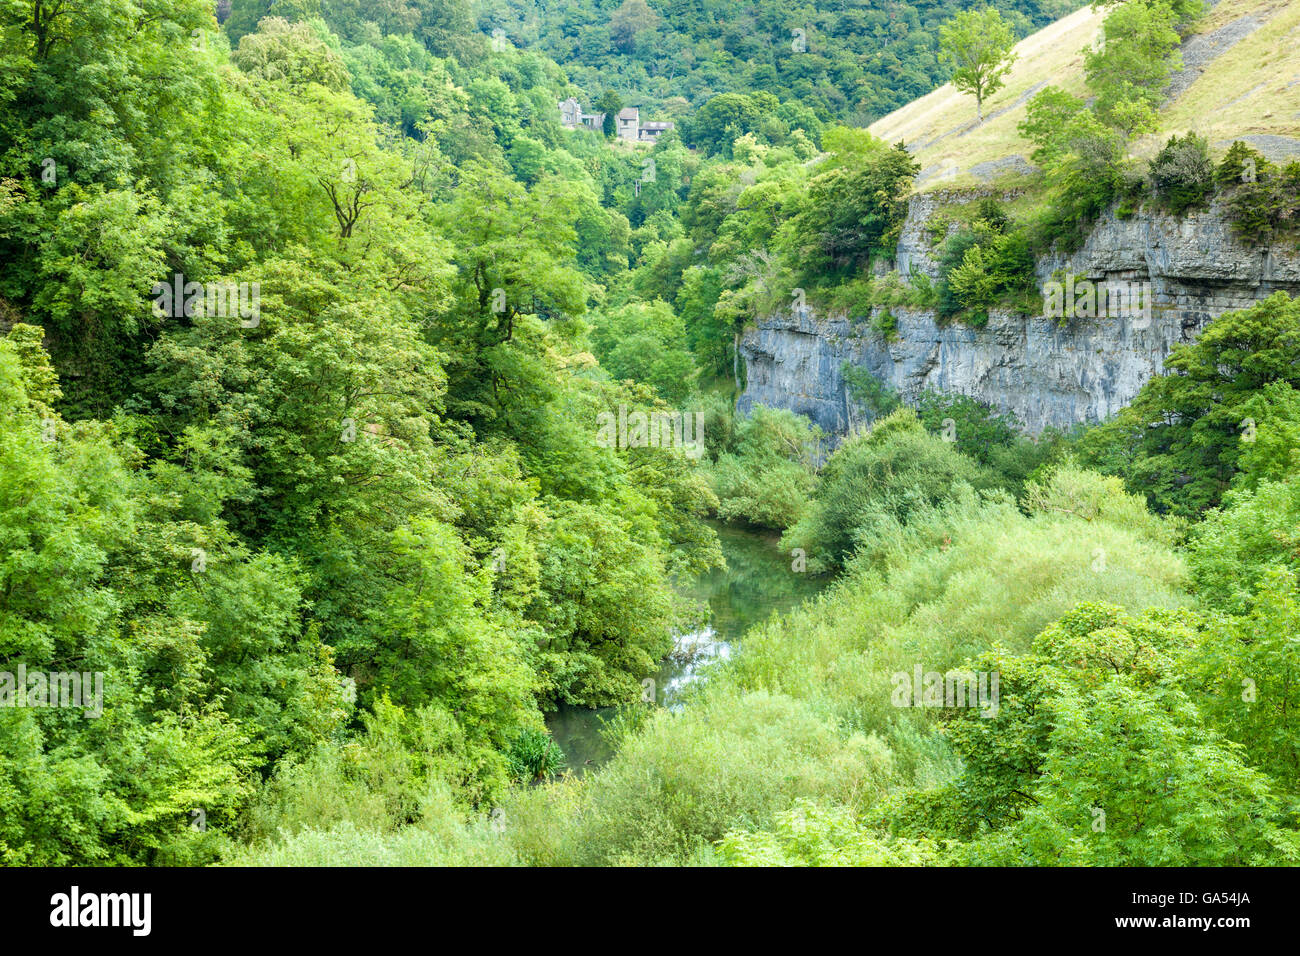 The River Wye almost hidden by trees in Miller's Dale in the Derbyshire Dales, White Peak, Peak District National Park, England, UK Stock Photo